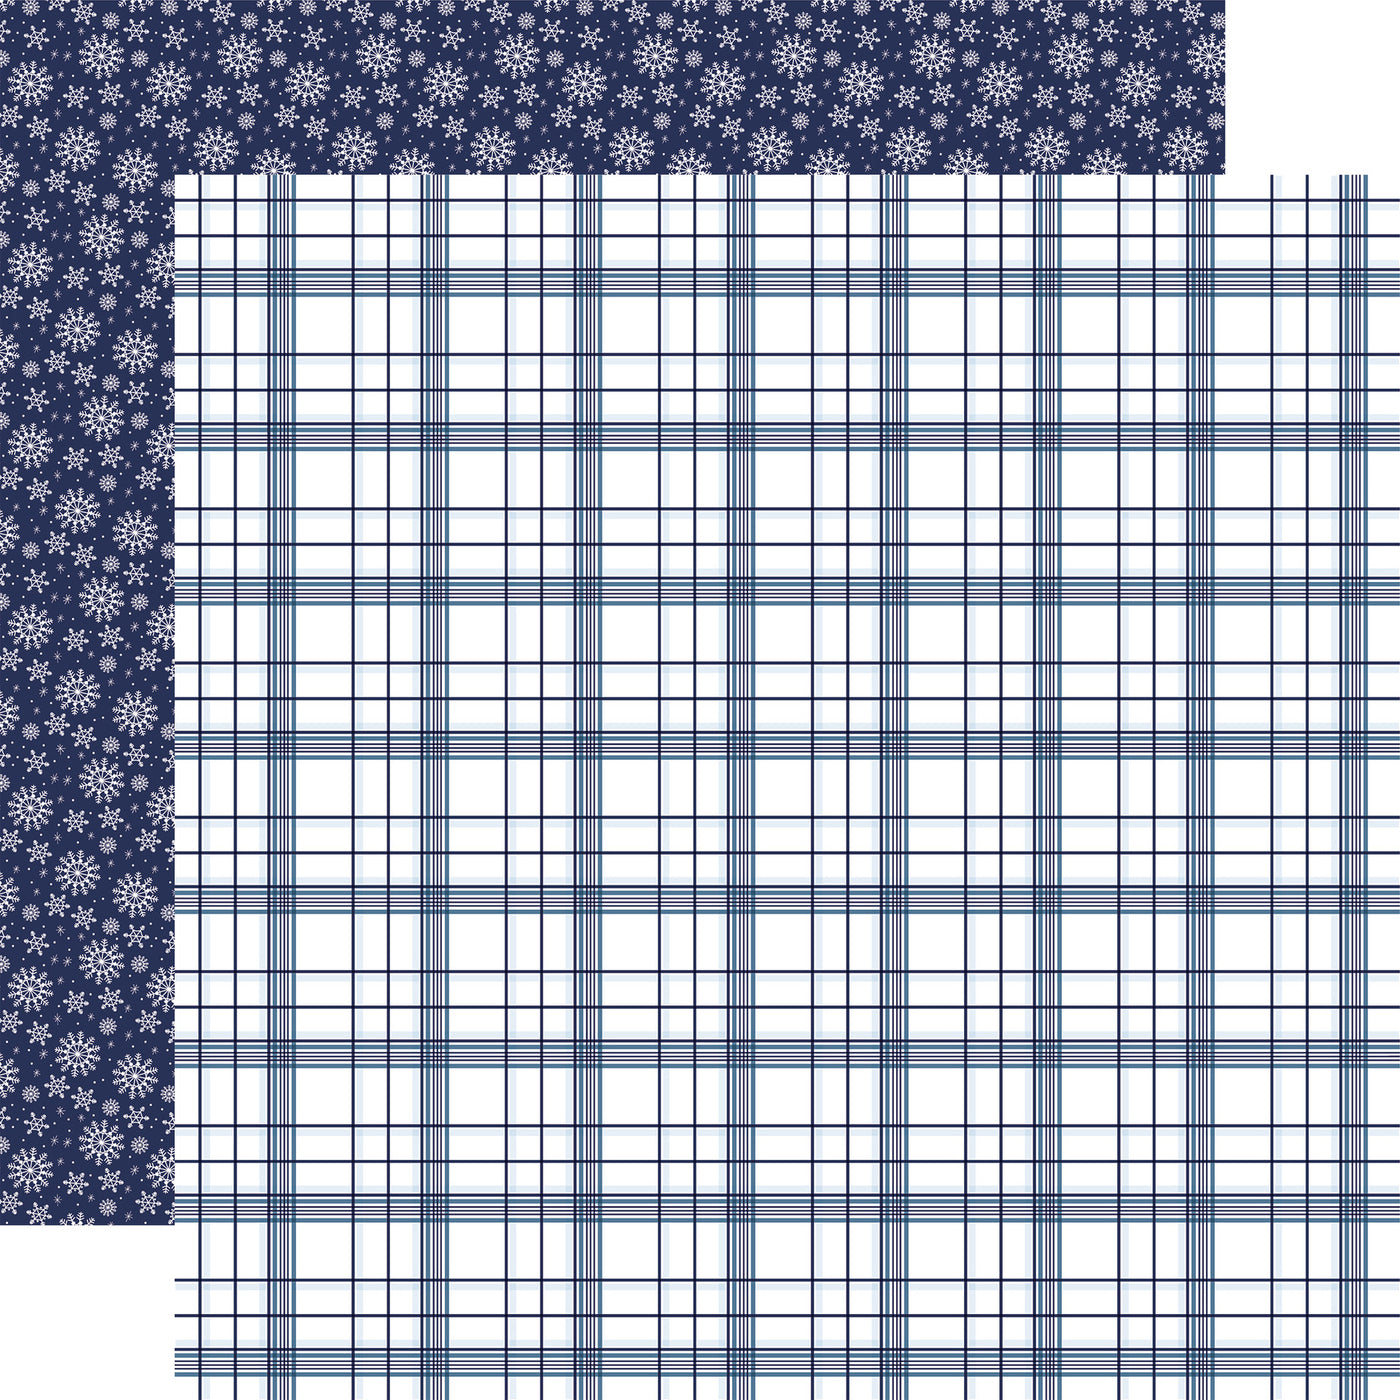 This is double-sided 12x12 cardstock with navy blue plaid on a white background; the reverse is white snowflakes on a navy blue background. 80 lb cover. Felt texture.